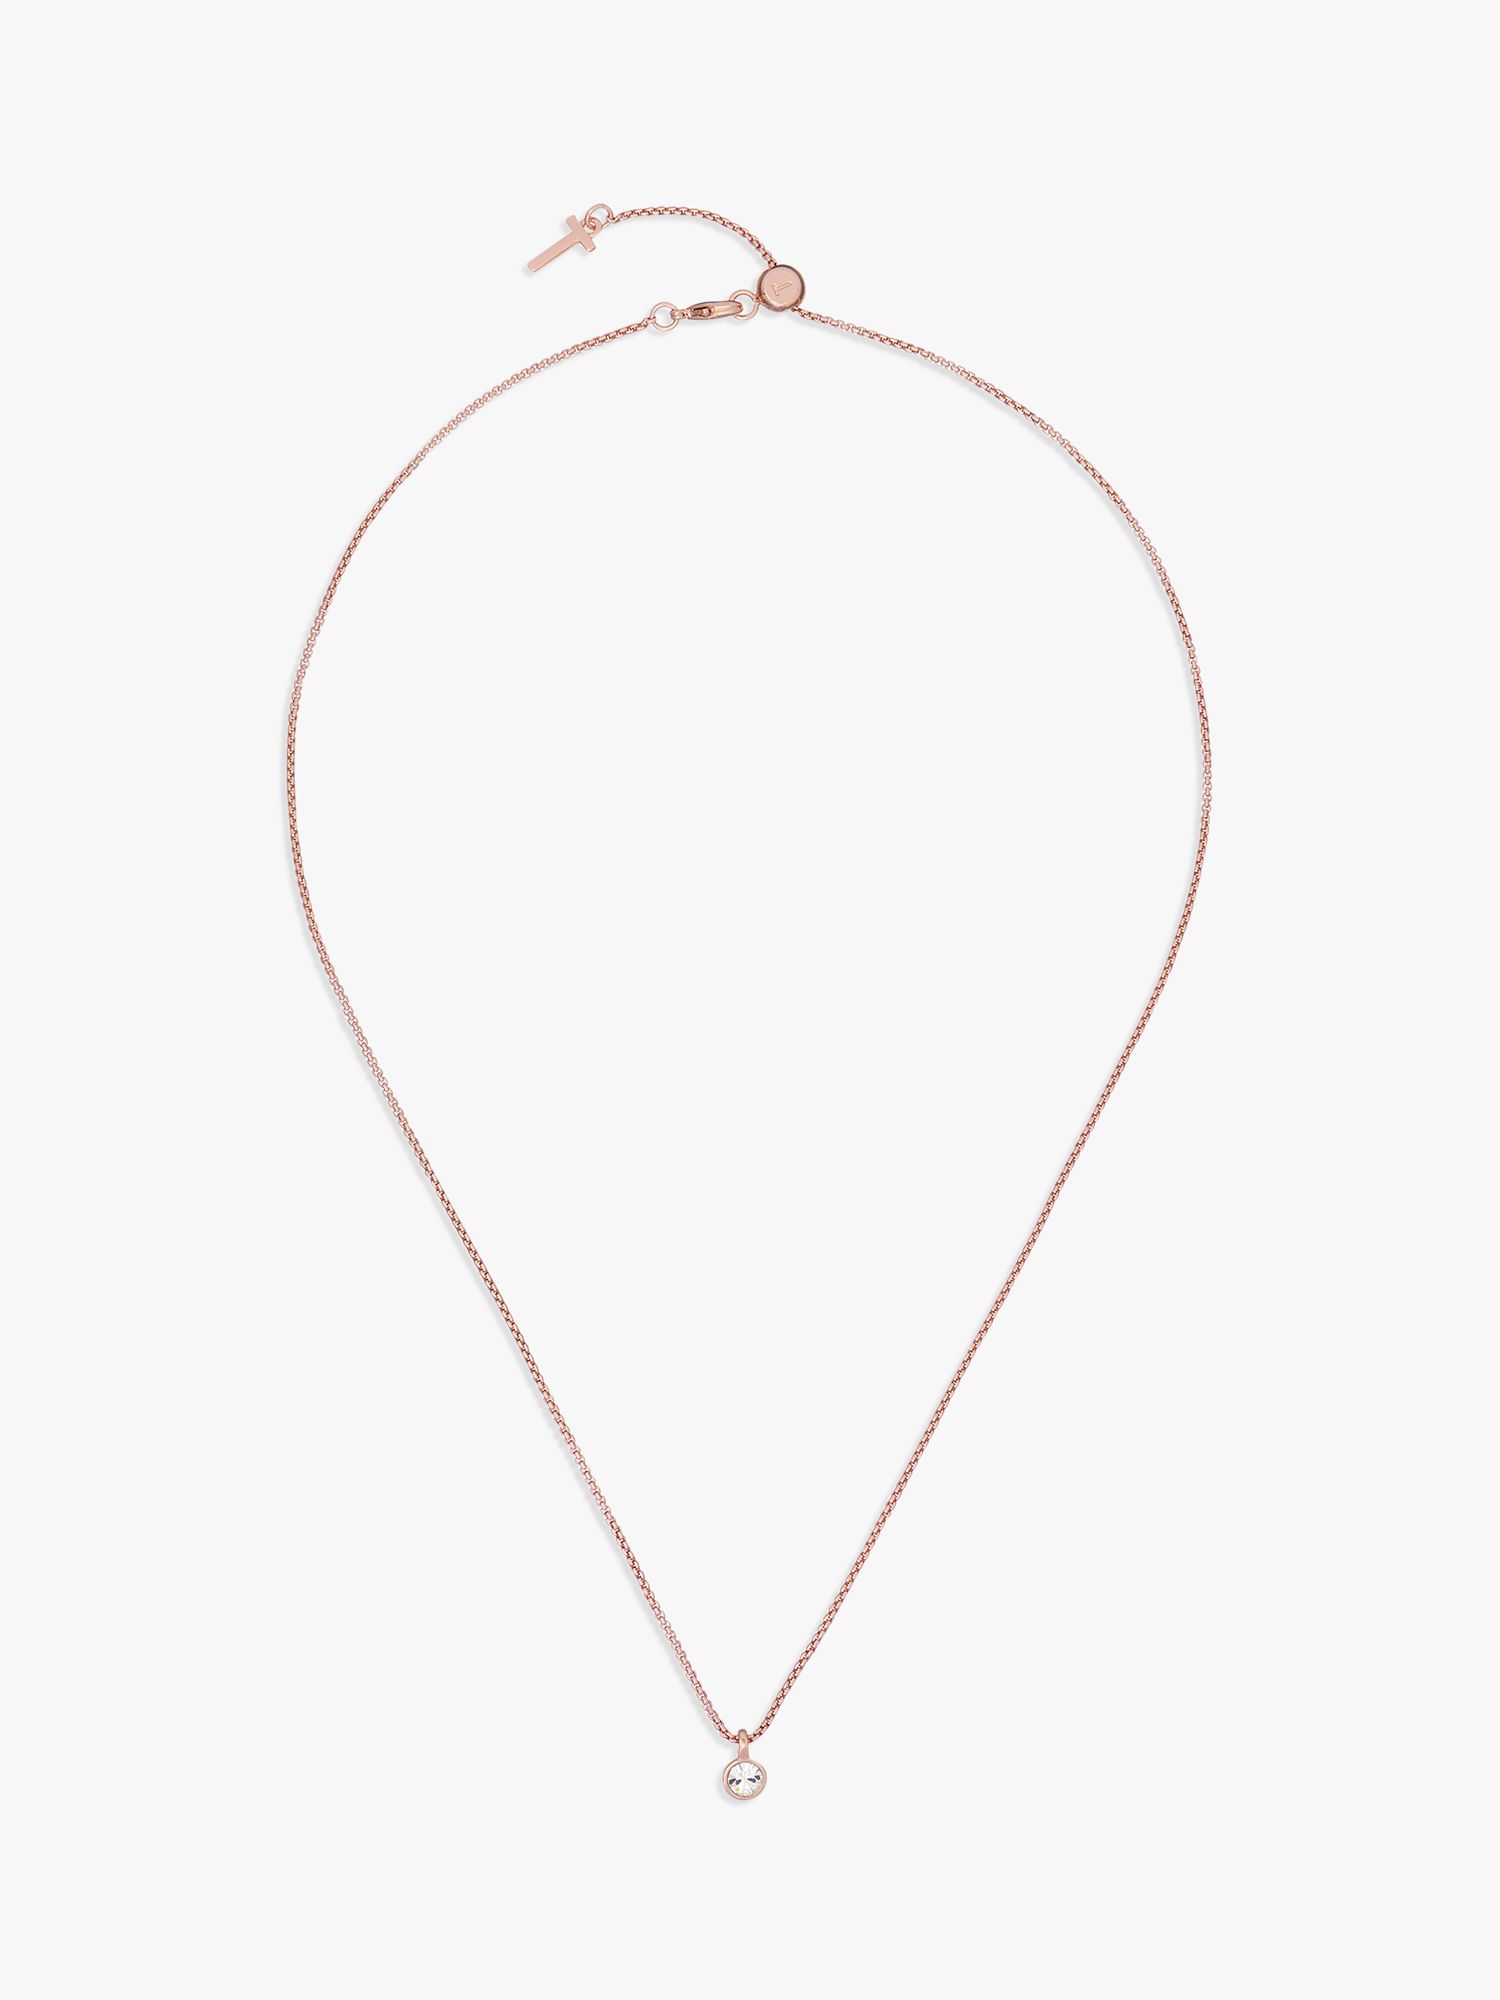 Ted Baker Sininaa Crystal Pendant Necklace, Rose Gold at John Lewis ...